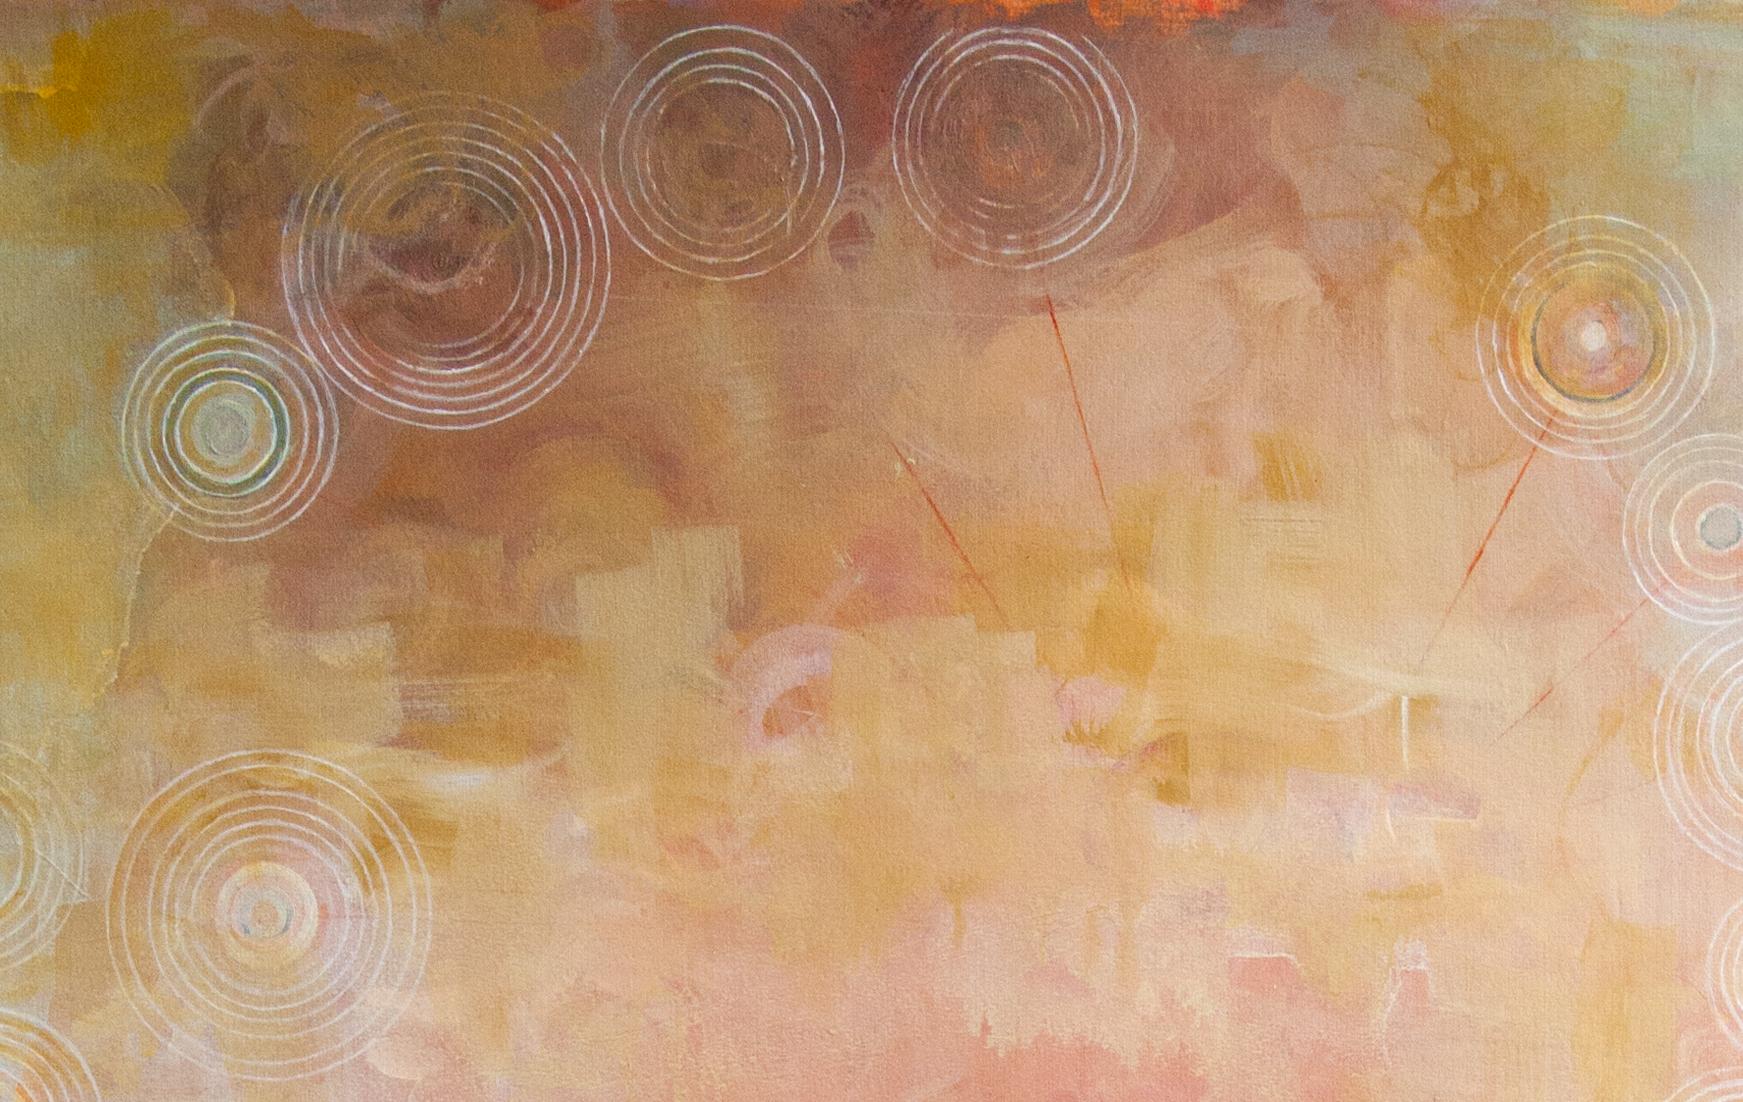 Sandra Cohen’s “Vault” is a 30 x 21 inch acrylic painting on thick archival paper, painted in tones of yellow, orange, pink, brown, red, and white. A female figure leaps from an abstract landscape and is partially obscured by the sky. Circular